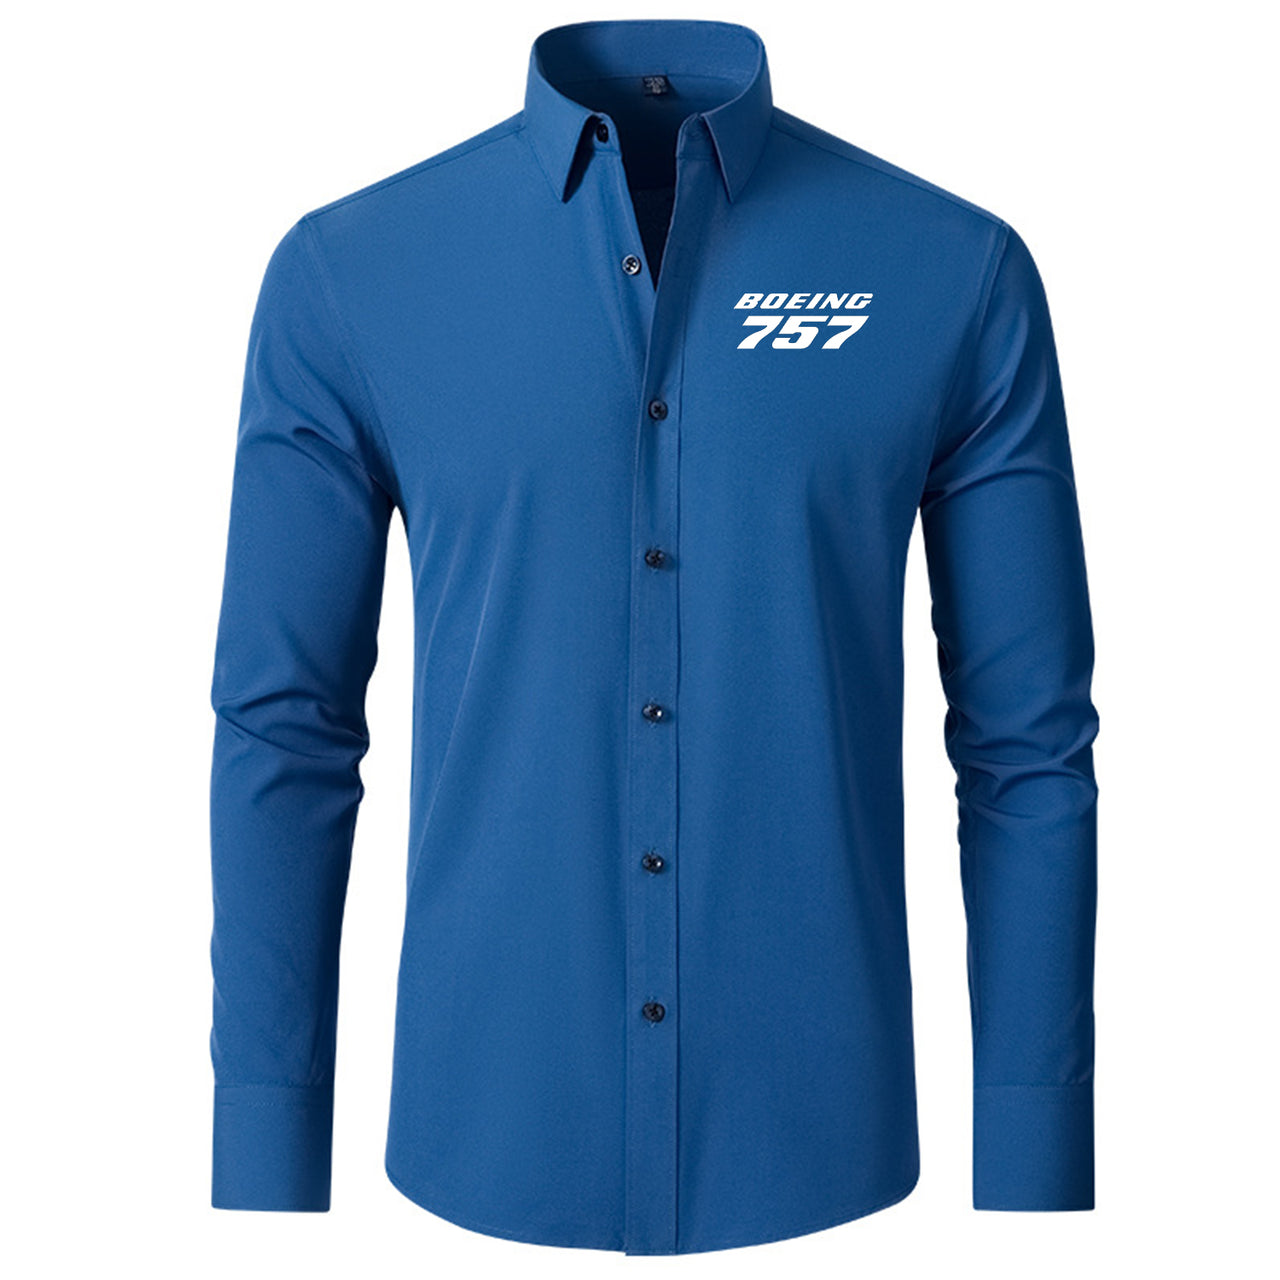 Boeing 757 & Text Designed Long Sleeve Shirts